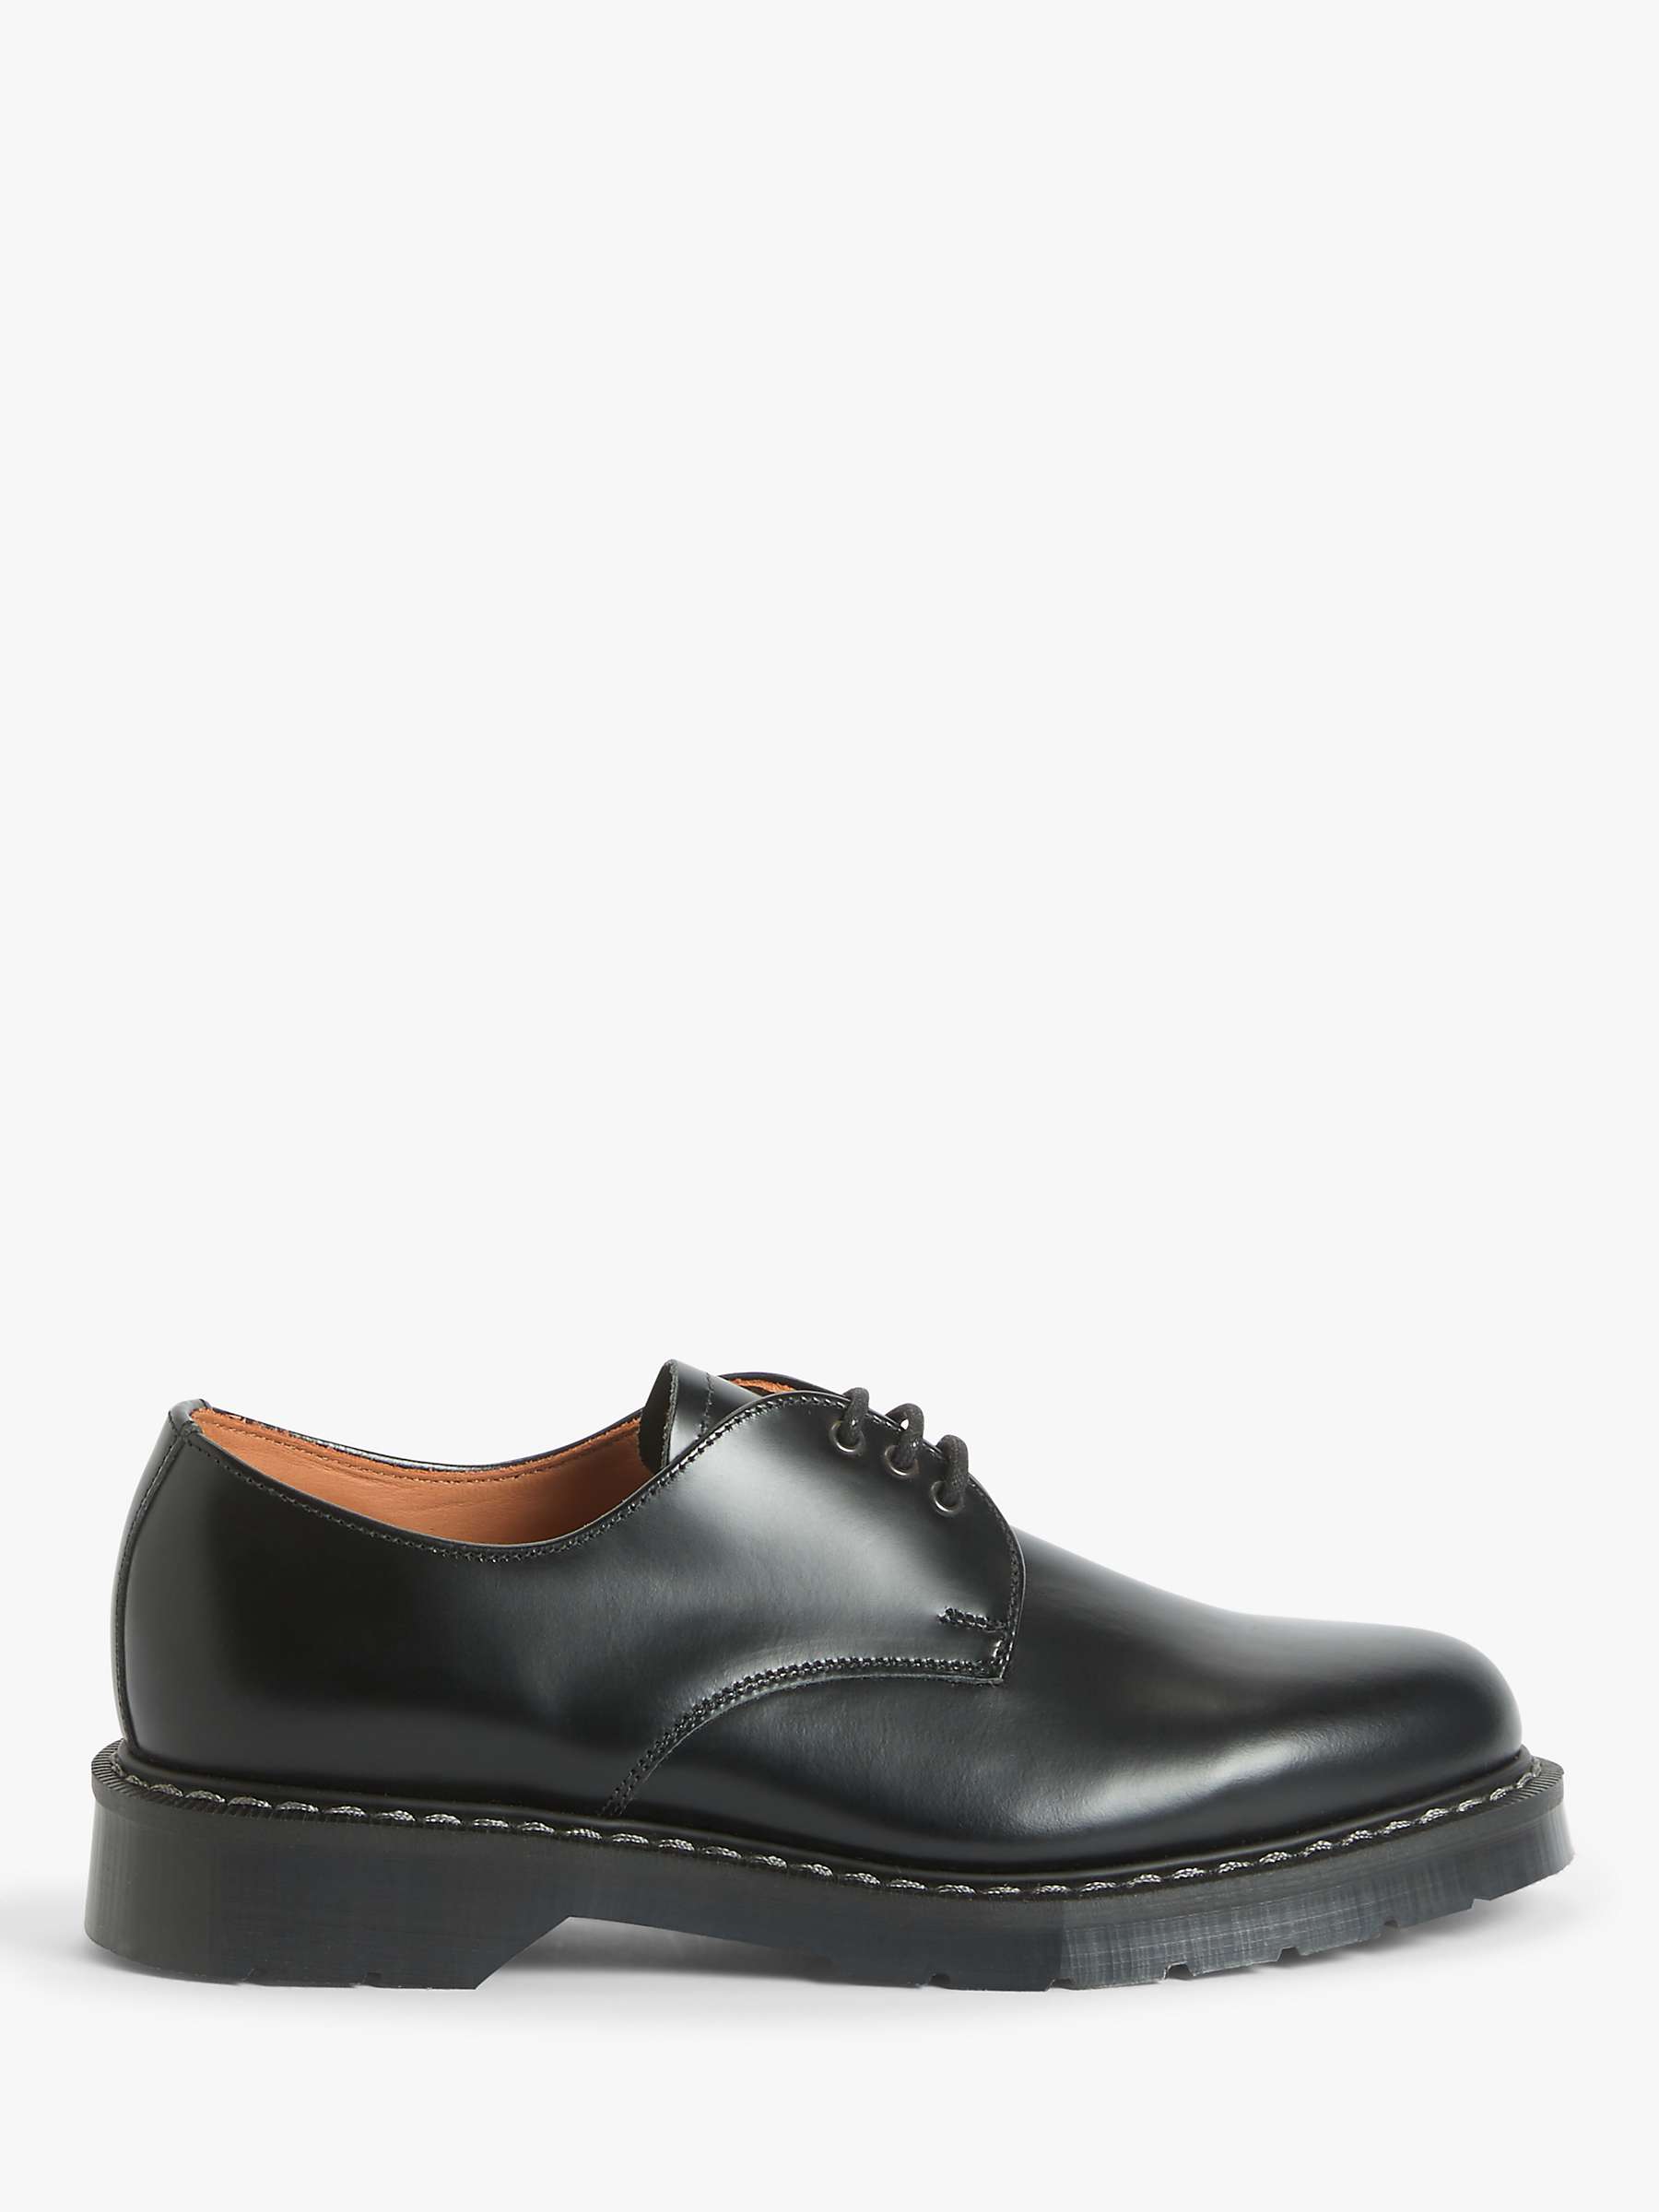 Buy Solovair Made in England 3 Eyelet Hi Shine Leather Gibson Shoes Online at johnlewis.com